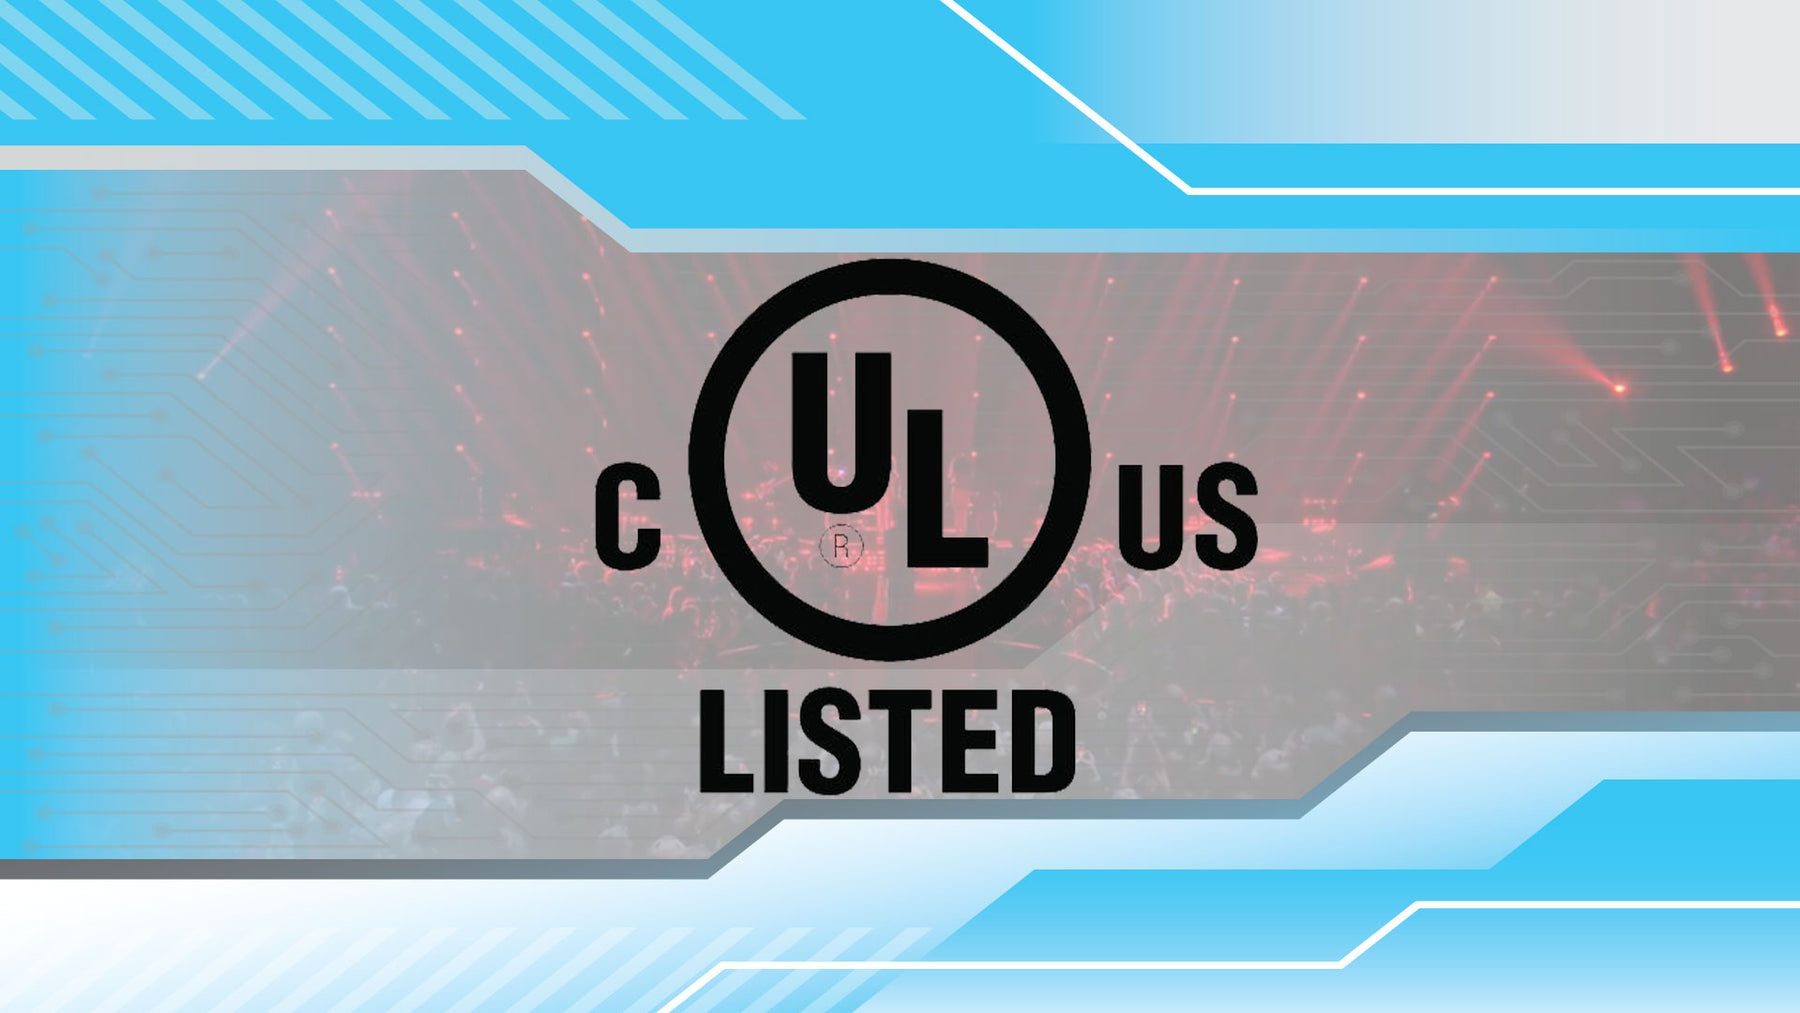 Why Choose UL Listed Products